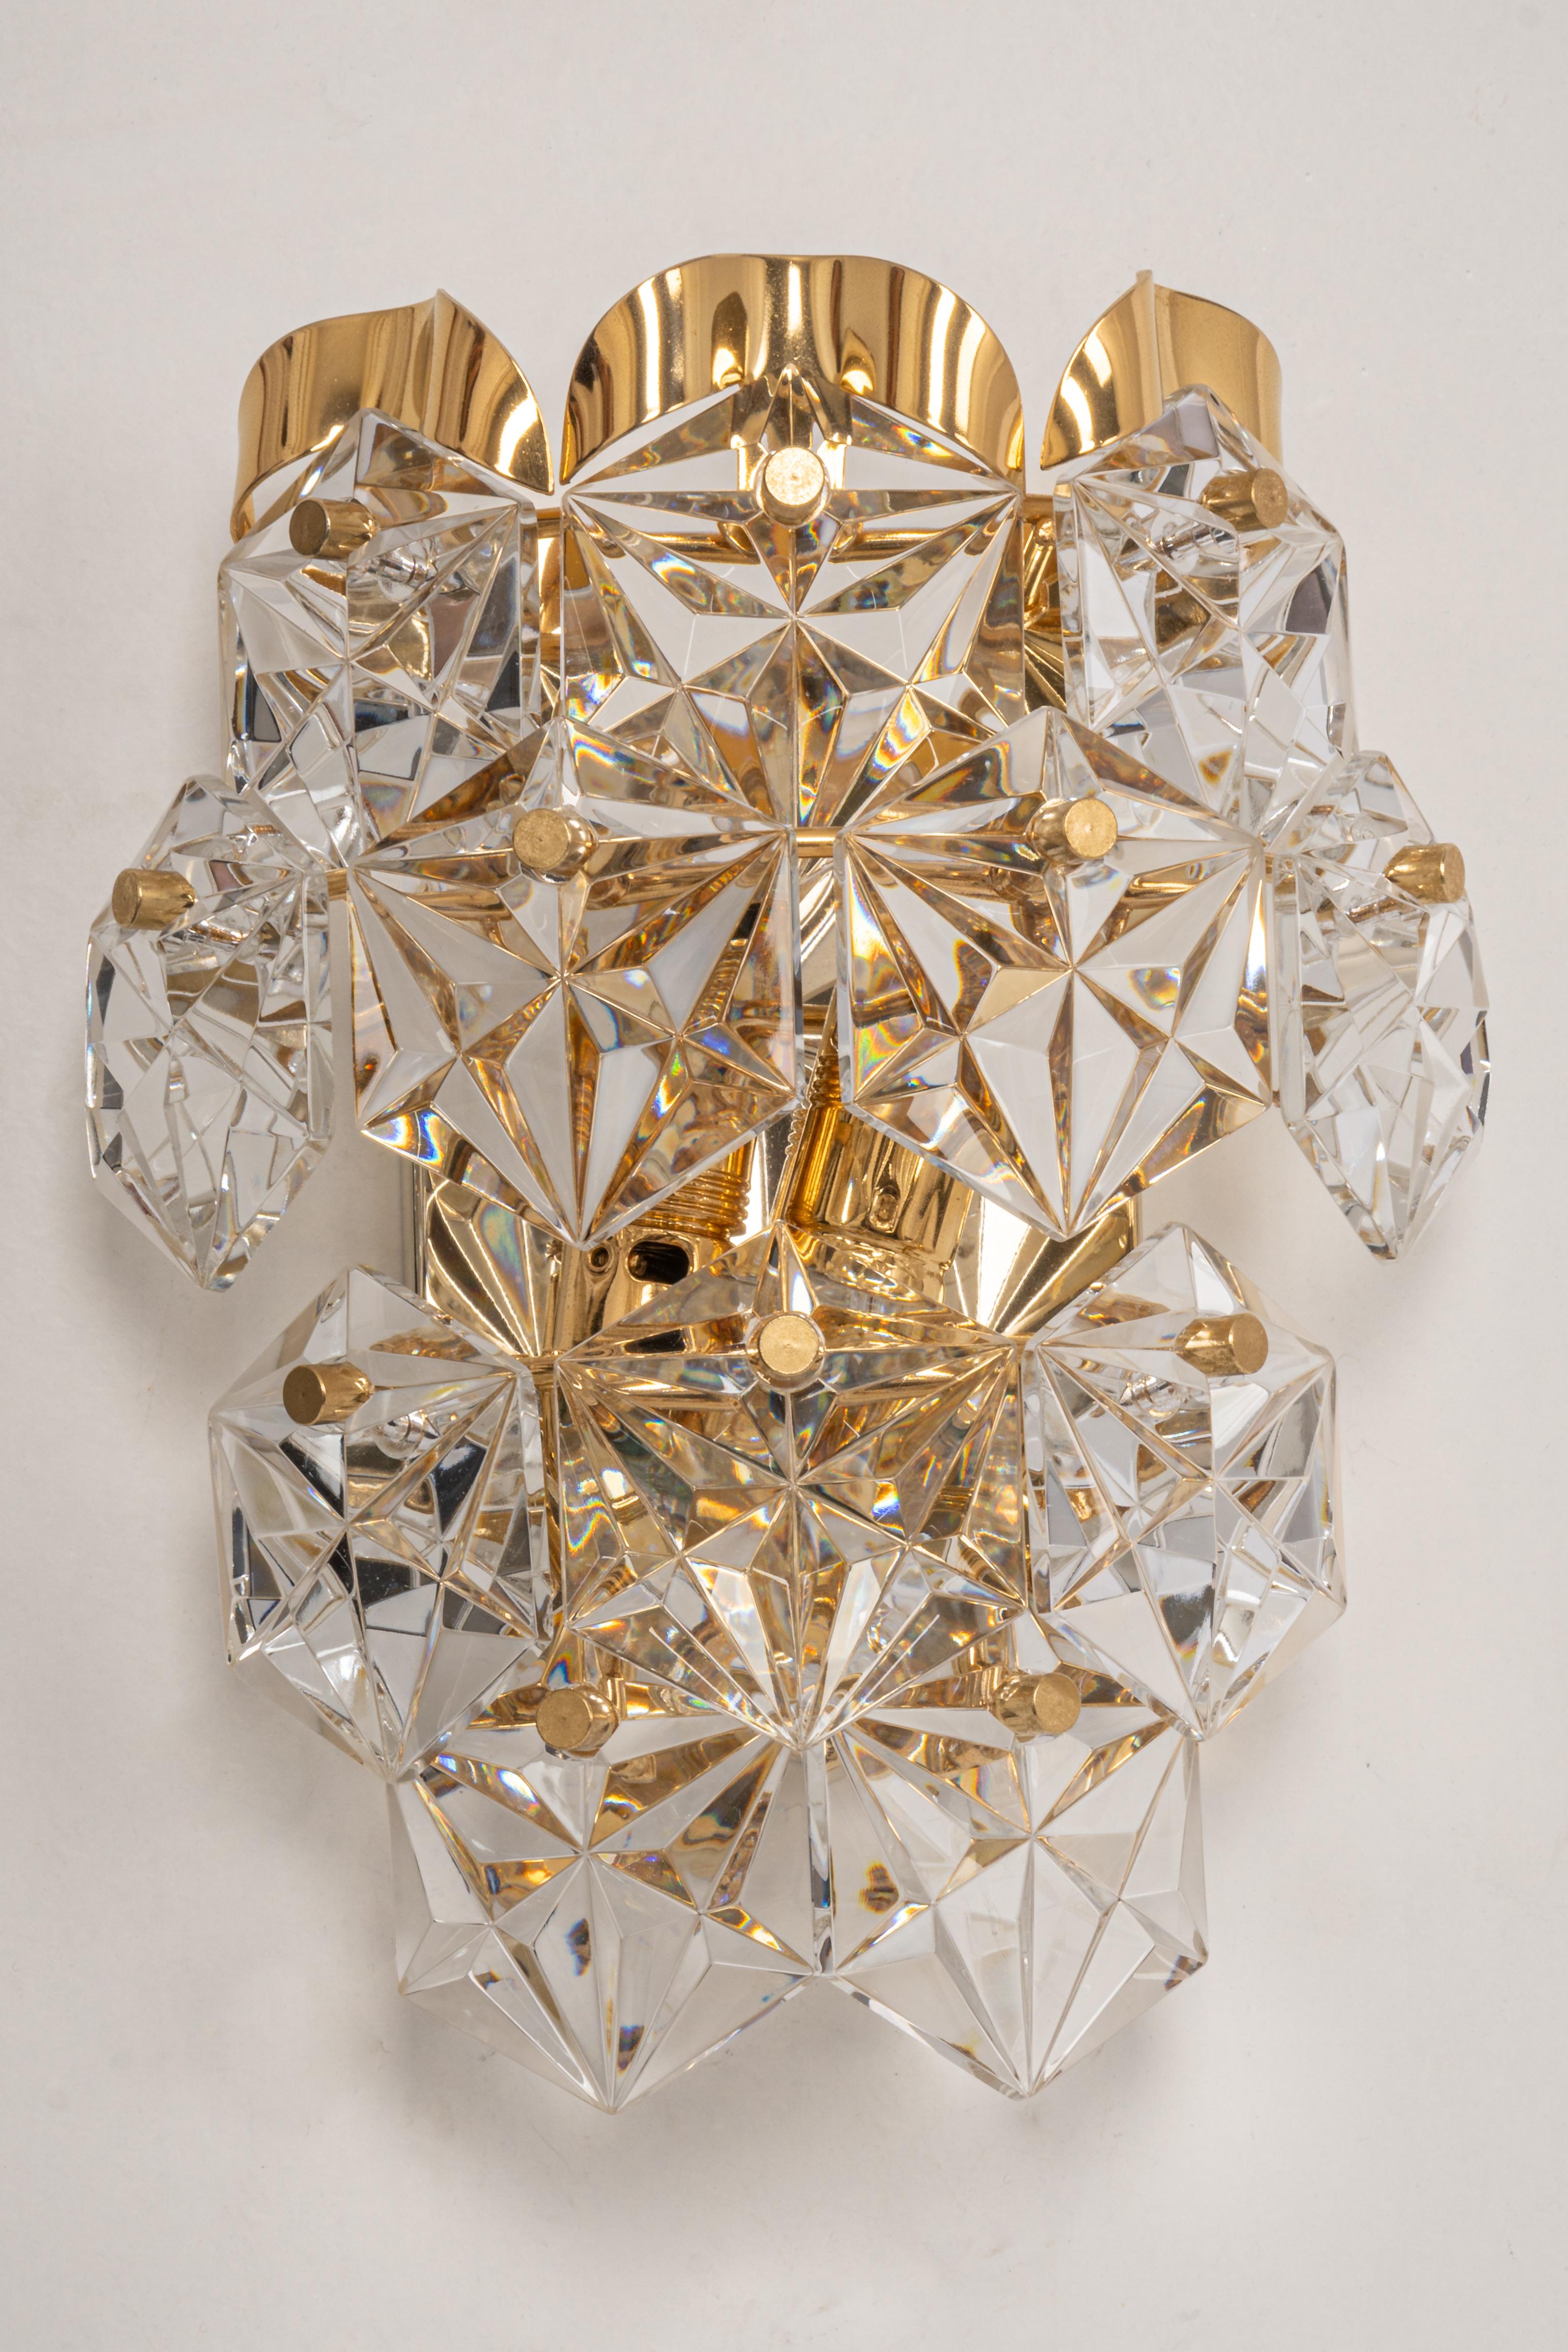 Mid-Century Modern 1 of 4 Stunning Pair of Crystal Sconces by Kinkeldey, Germany, 1970s For Sale